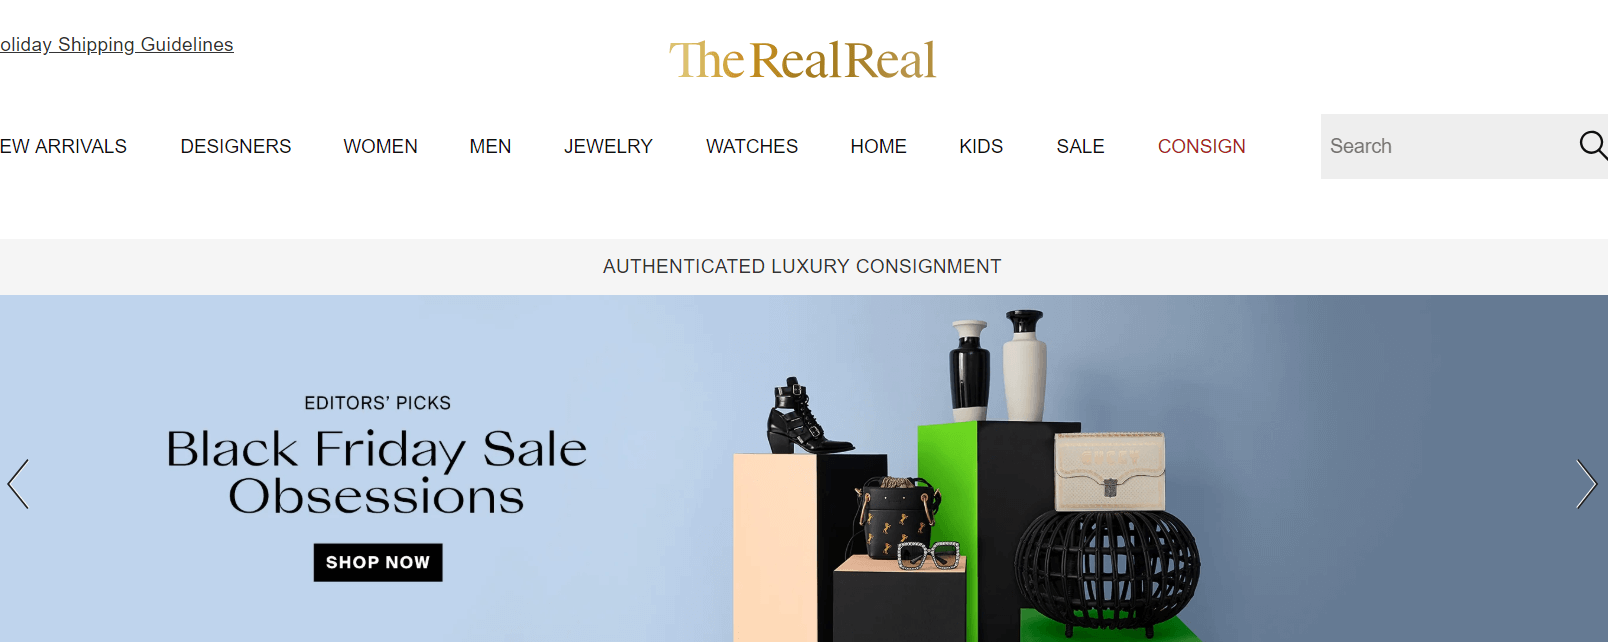 the realreal官网--therealreal 二手奢侈品电商交易网站